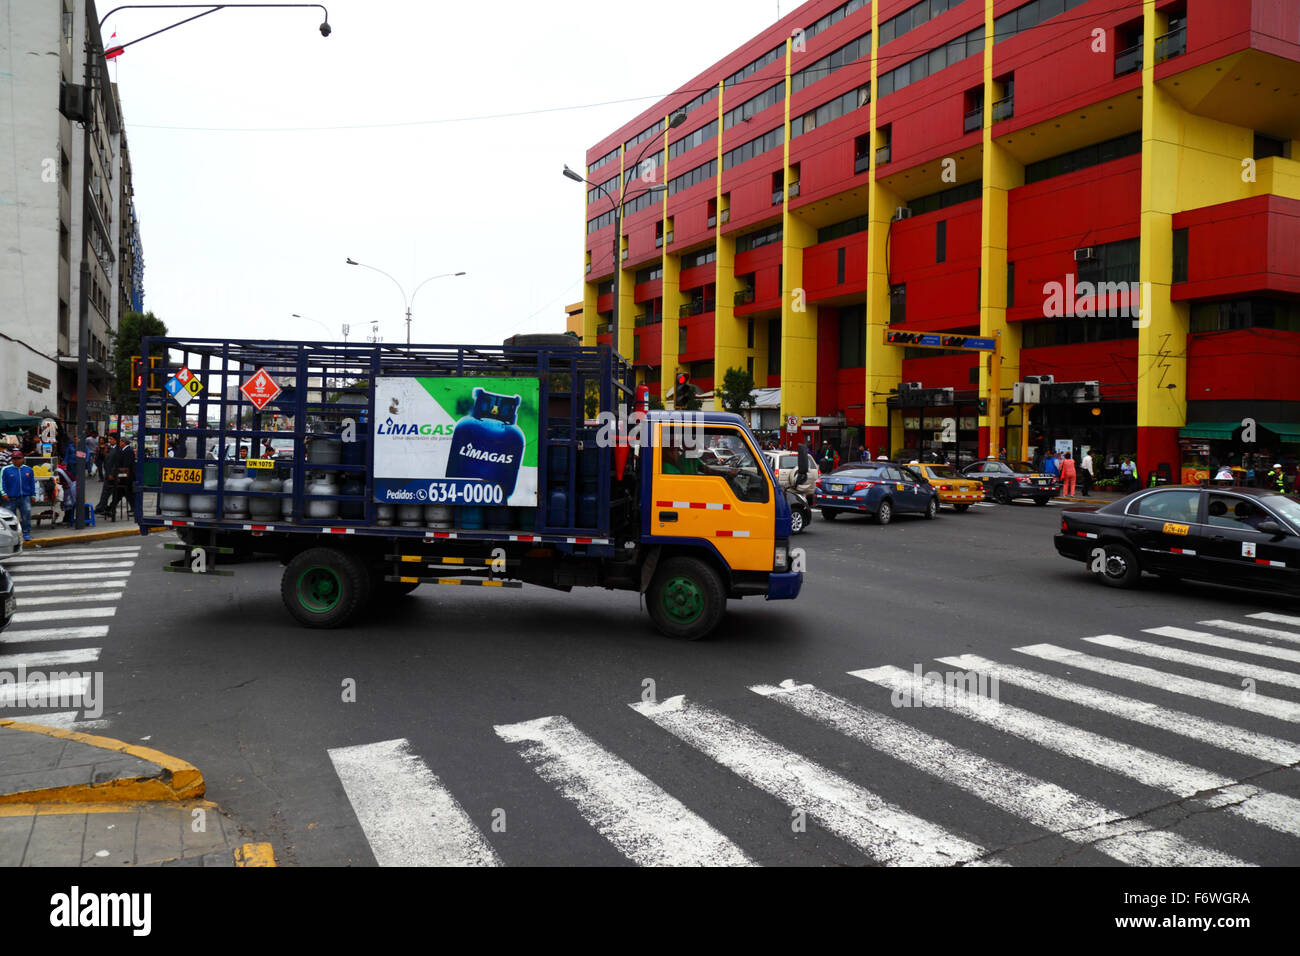 Limagas domestic gas delivery truck and traffic on Av Abancay in central  Lima, Peru Stock Photo - Alamy